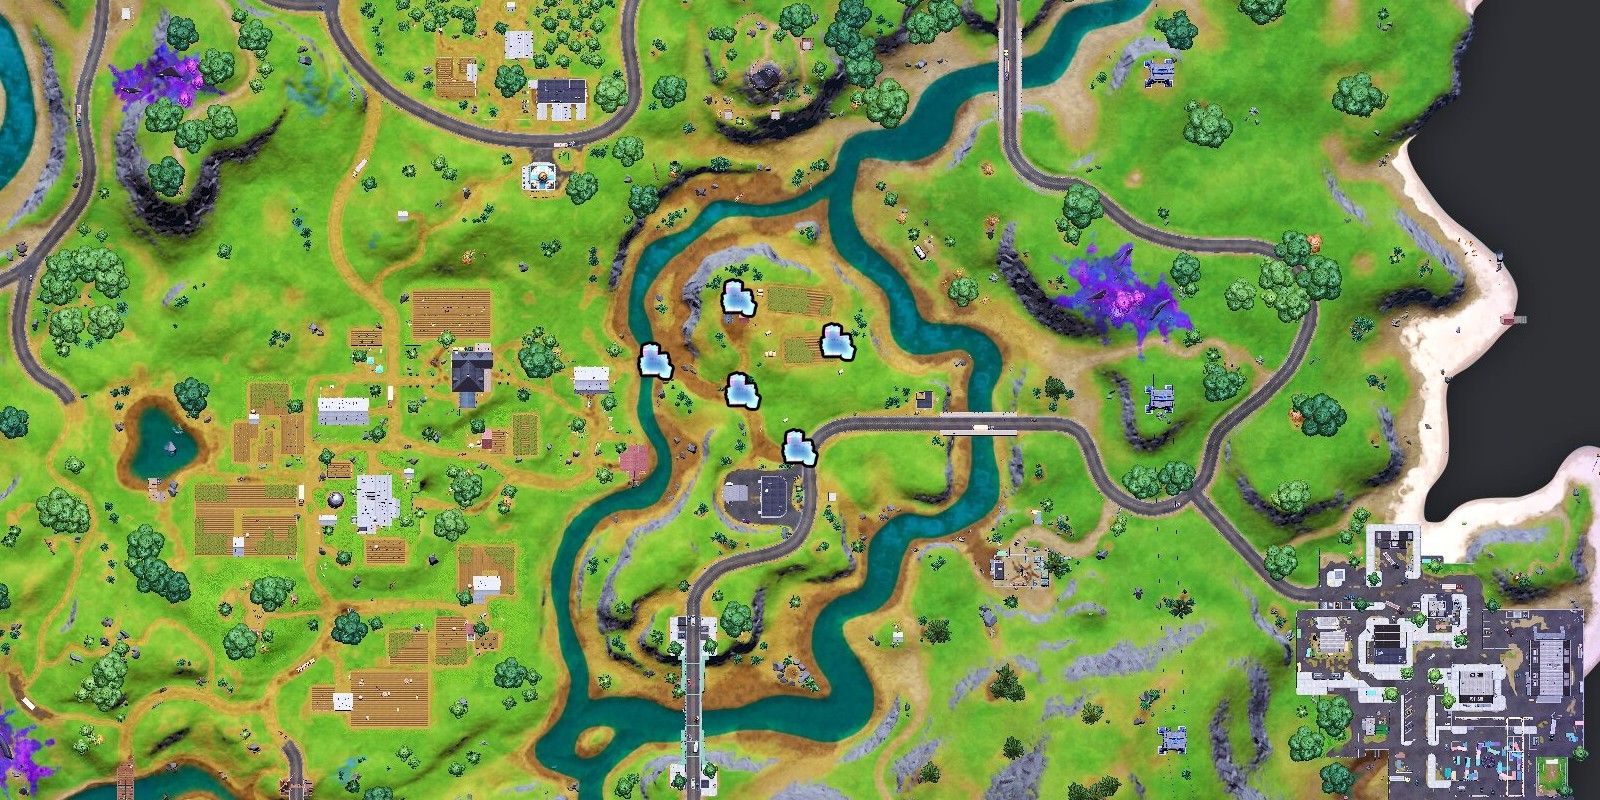 Prepper Supply Placement Locations during Week 6 of Fortnite Season 7